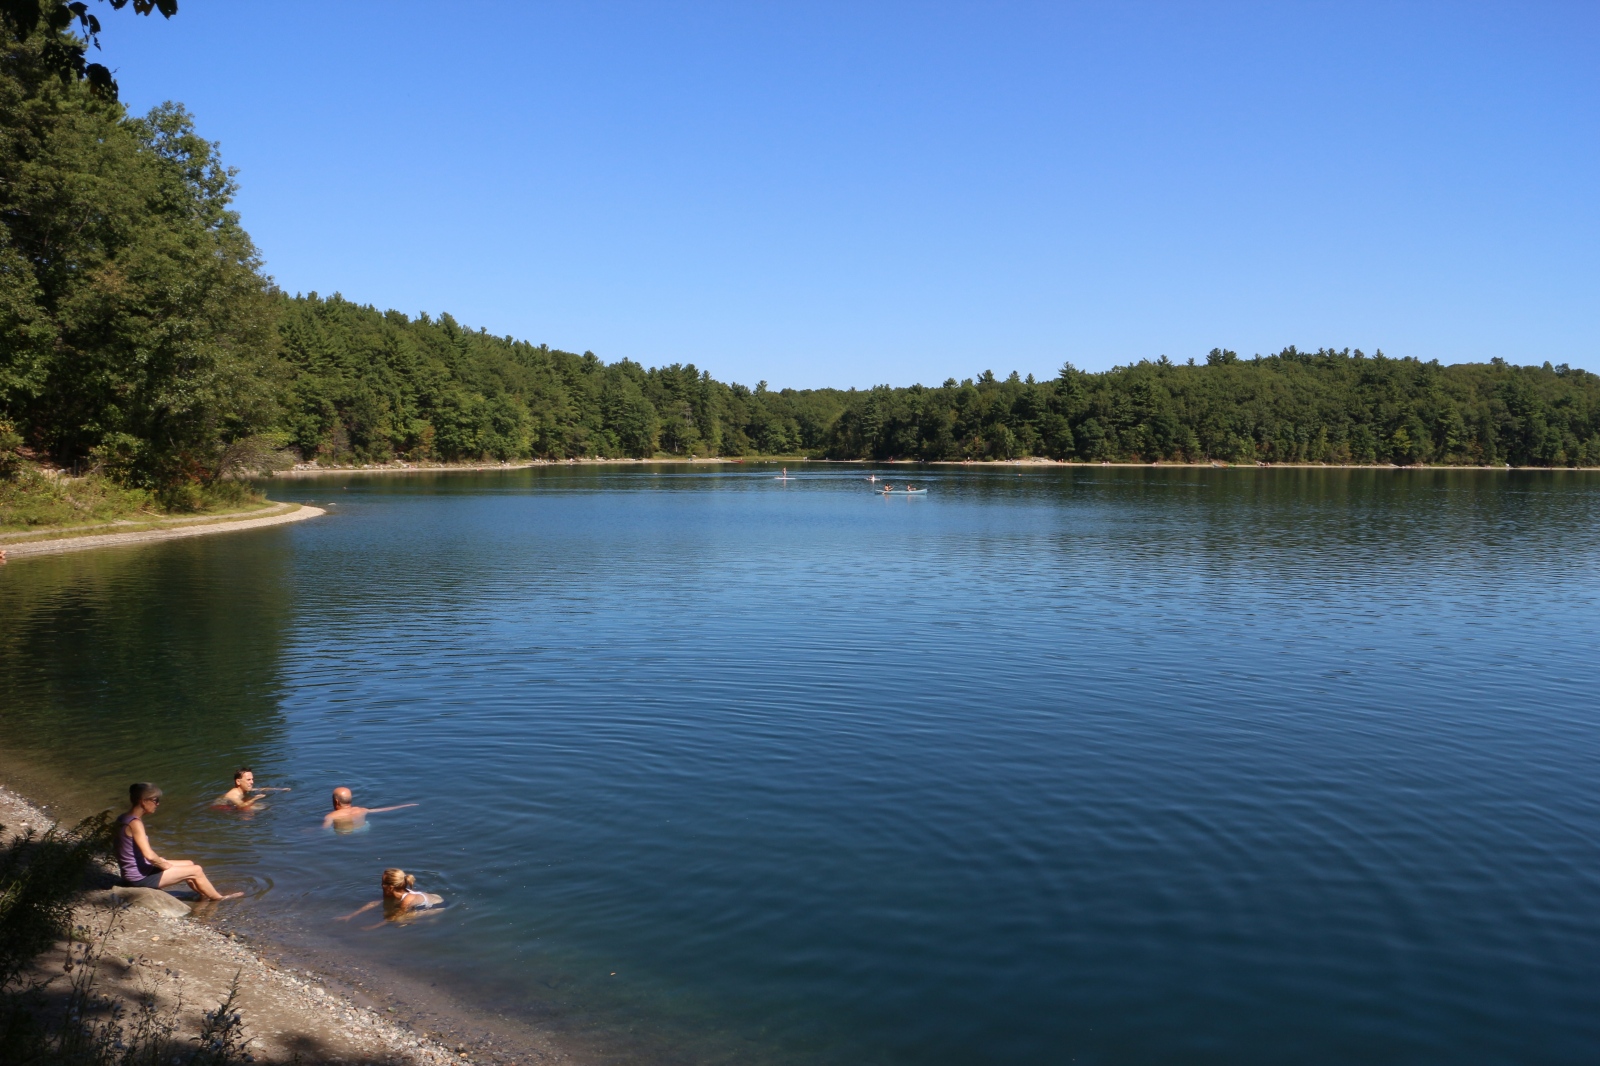 At the Water's Edge - Walden Pond, Concord, Massachusetts